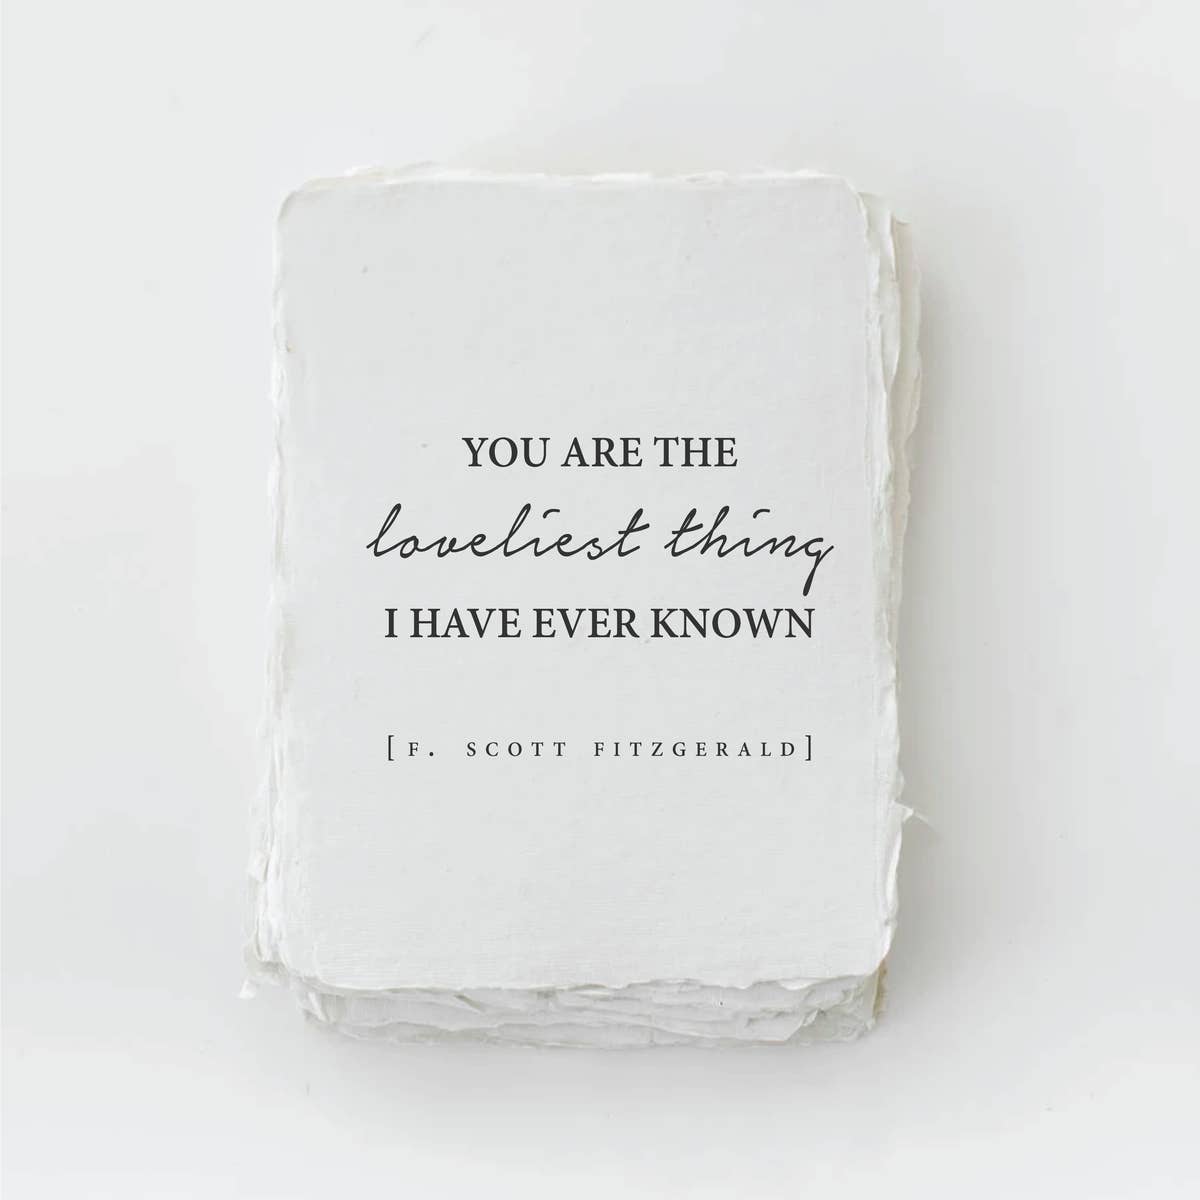 "You are the loveliest thing...." greeting card by Paper Baristas